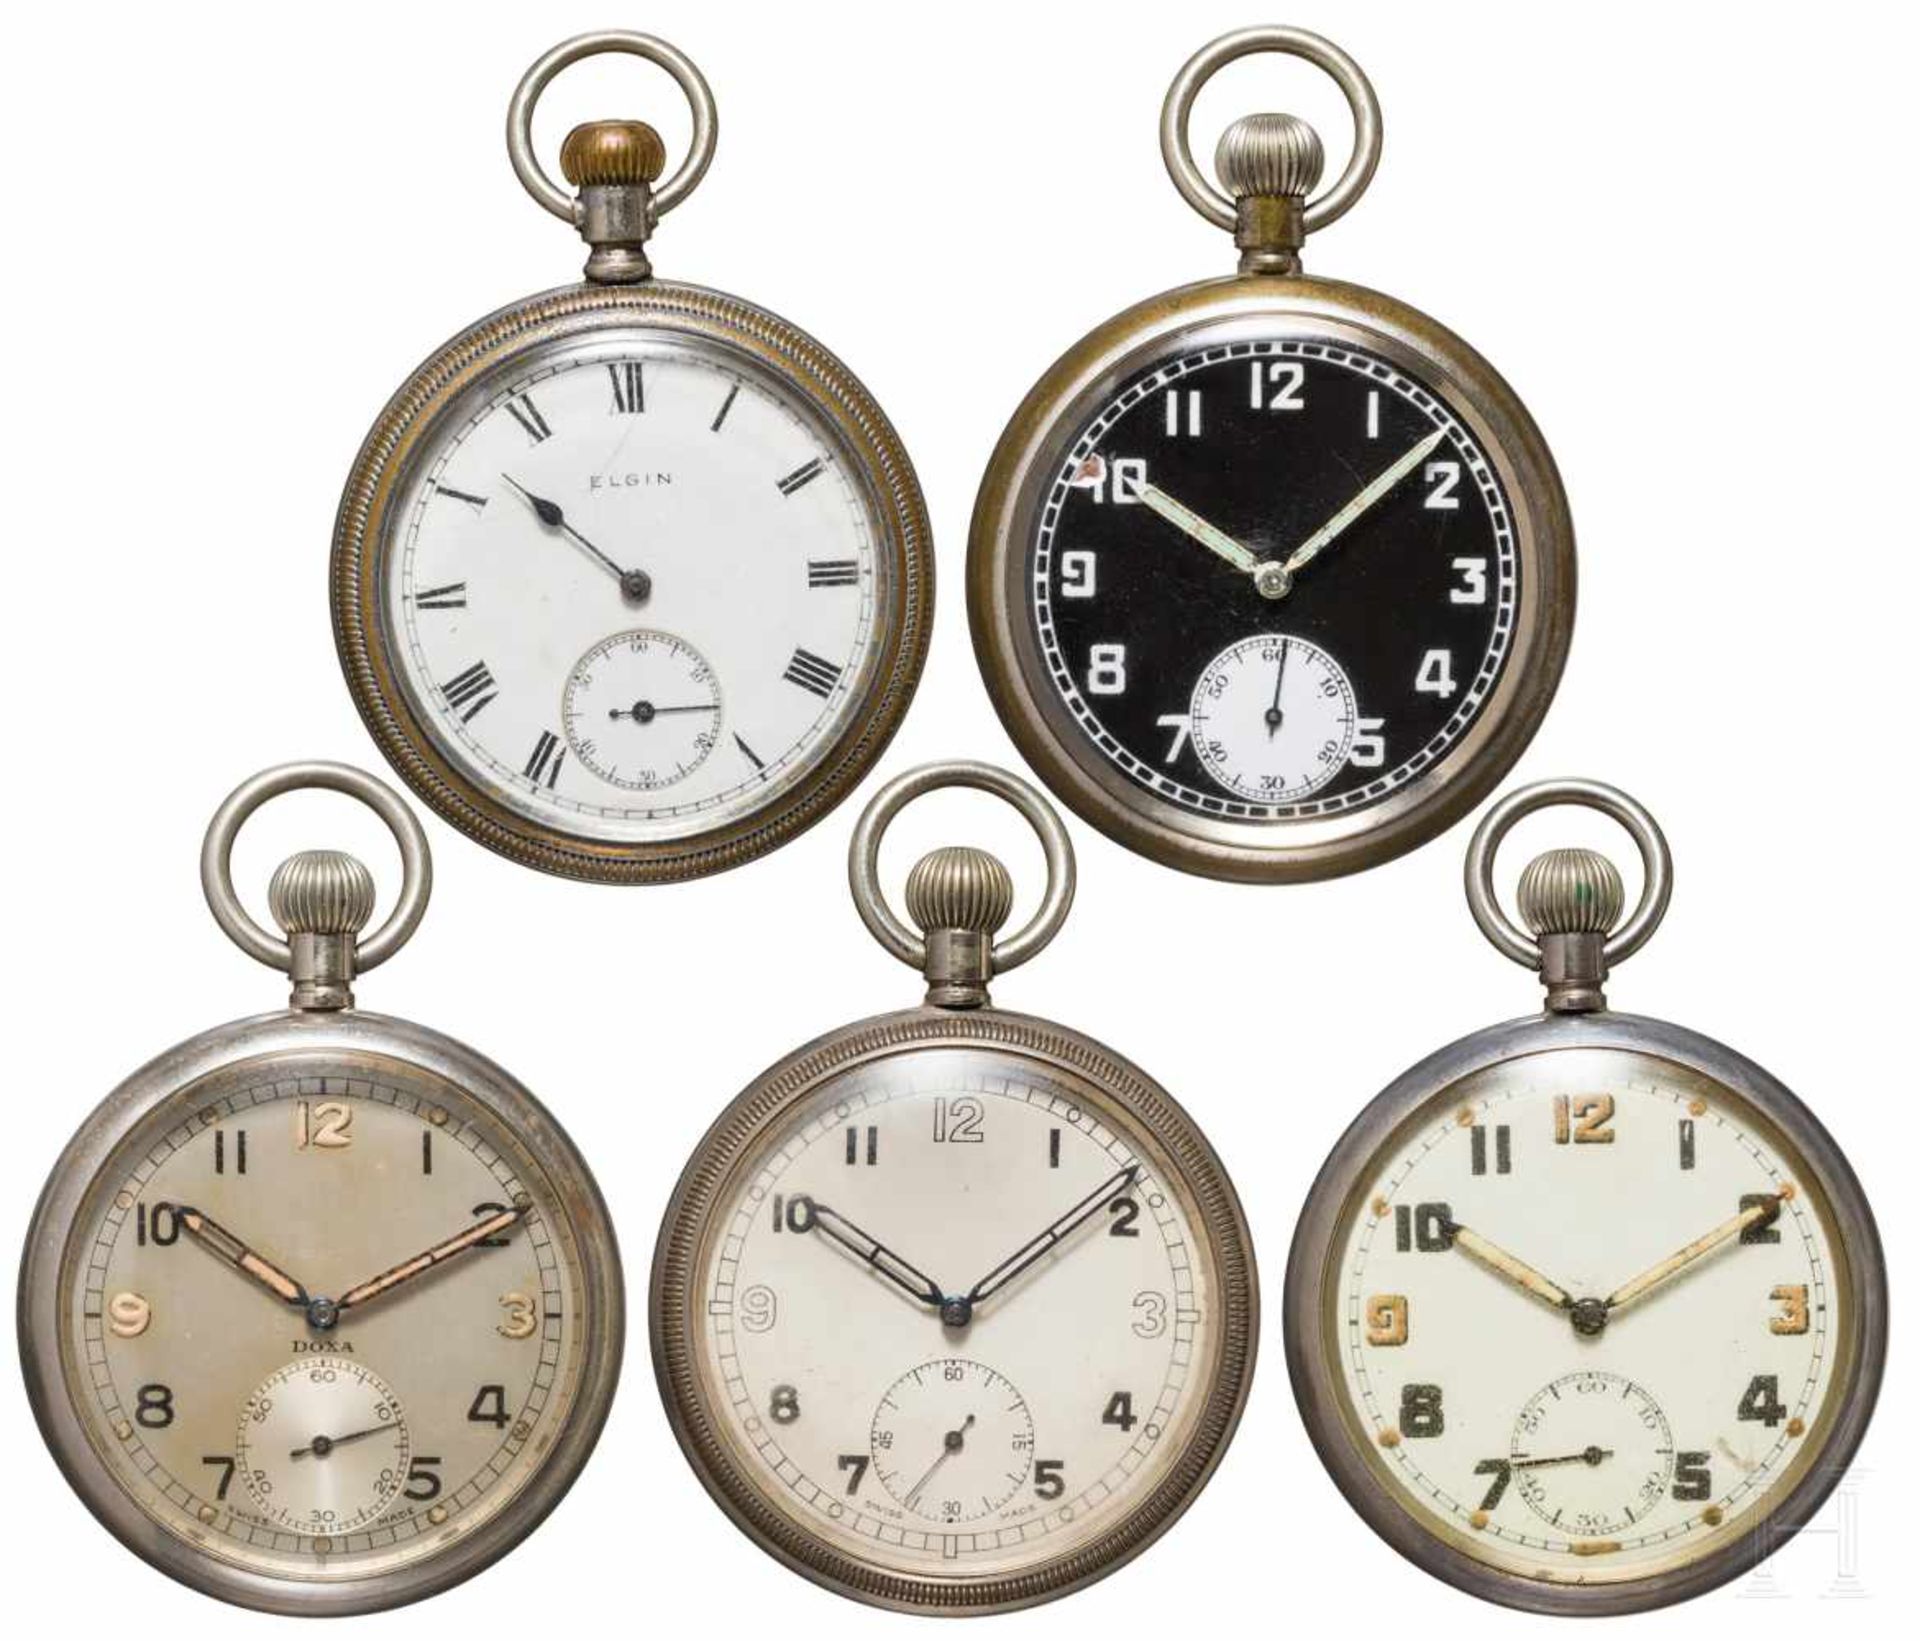 Five service watches of the British ArmyVarious models and makers, manual winding and "broad arrow",